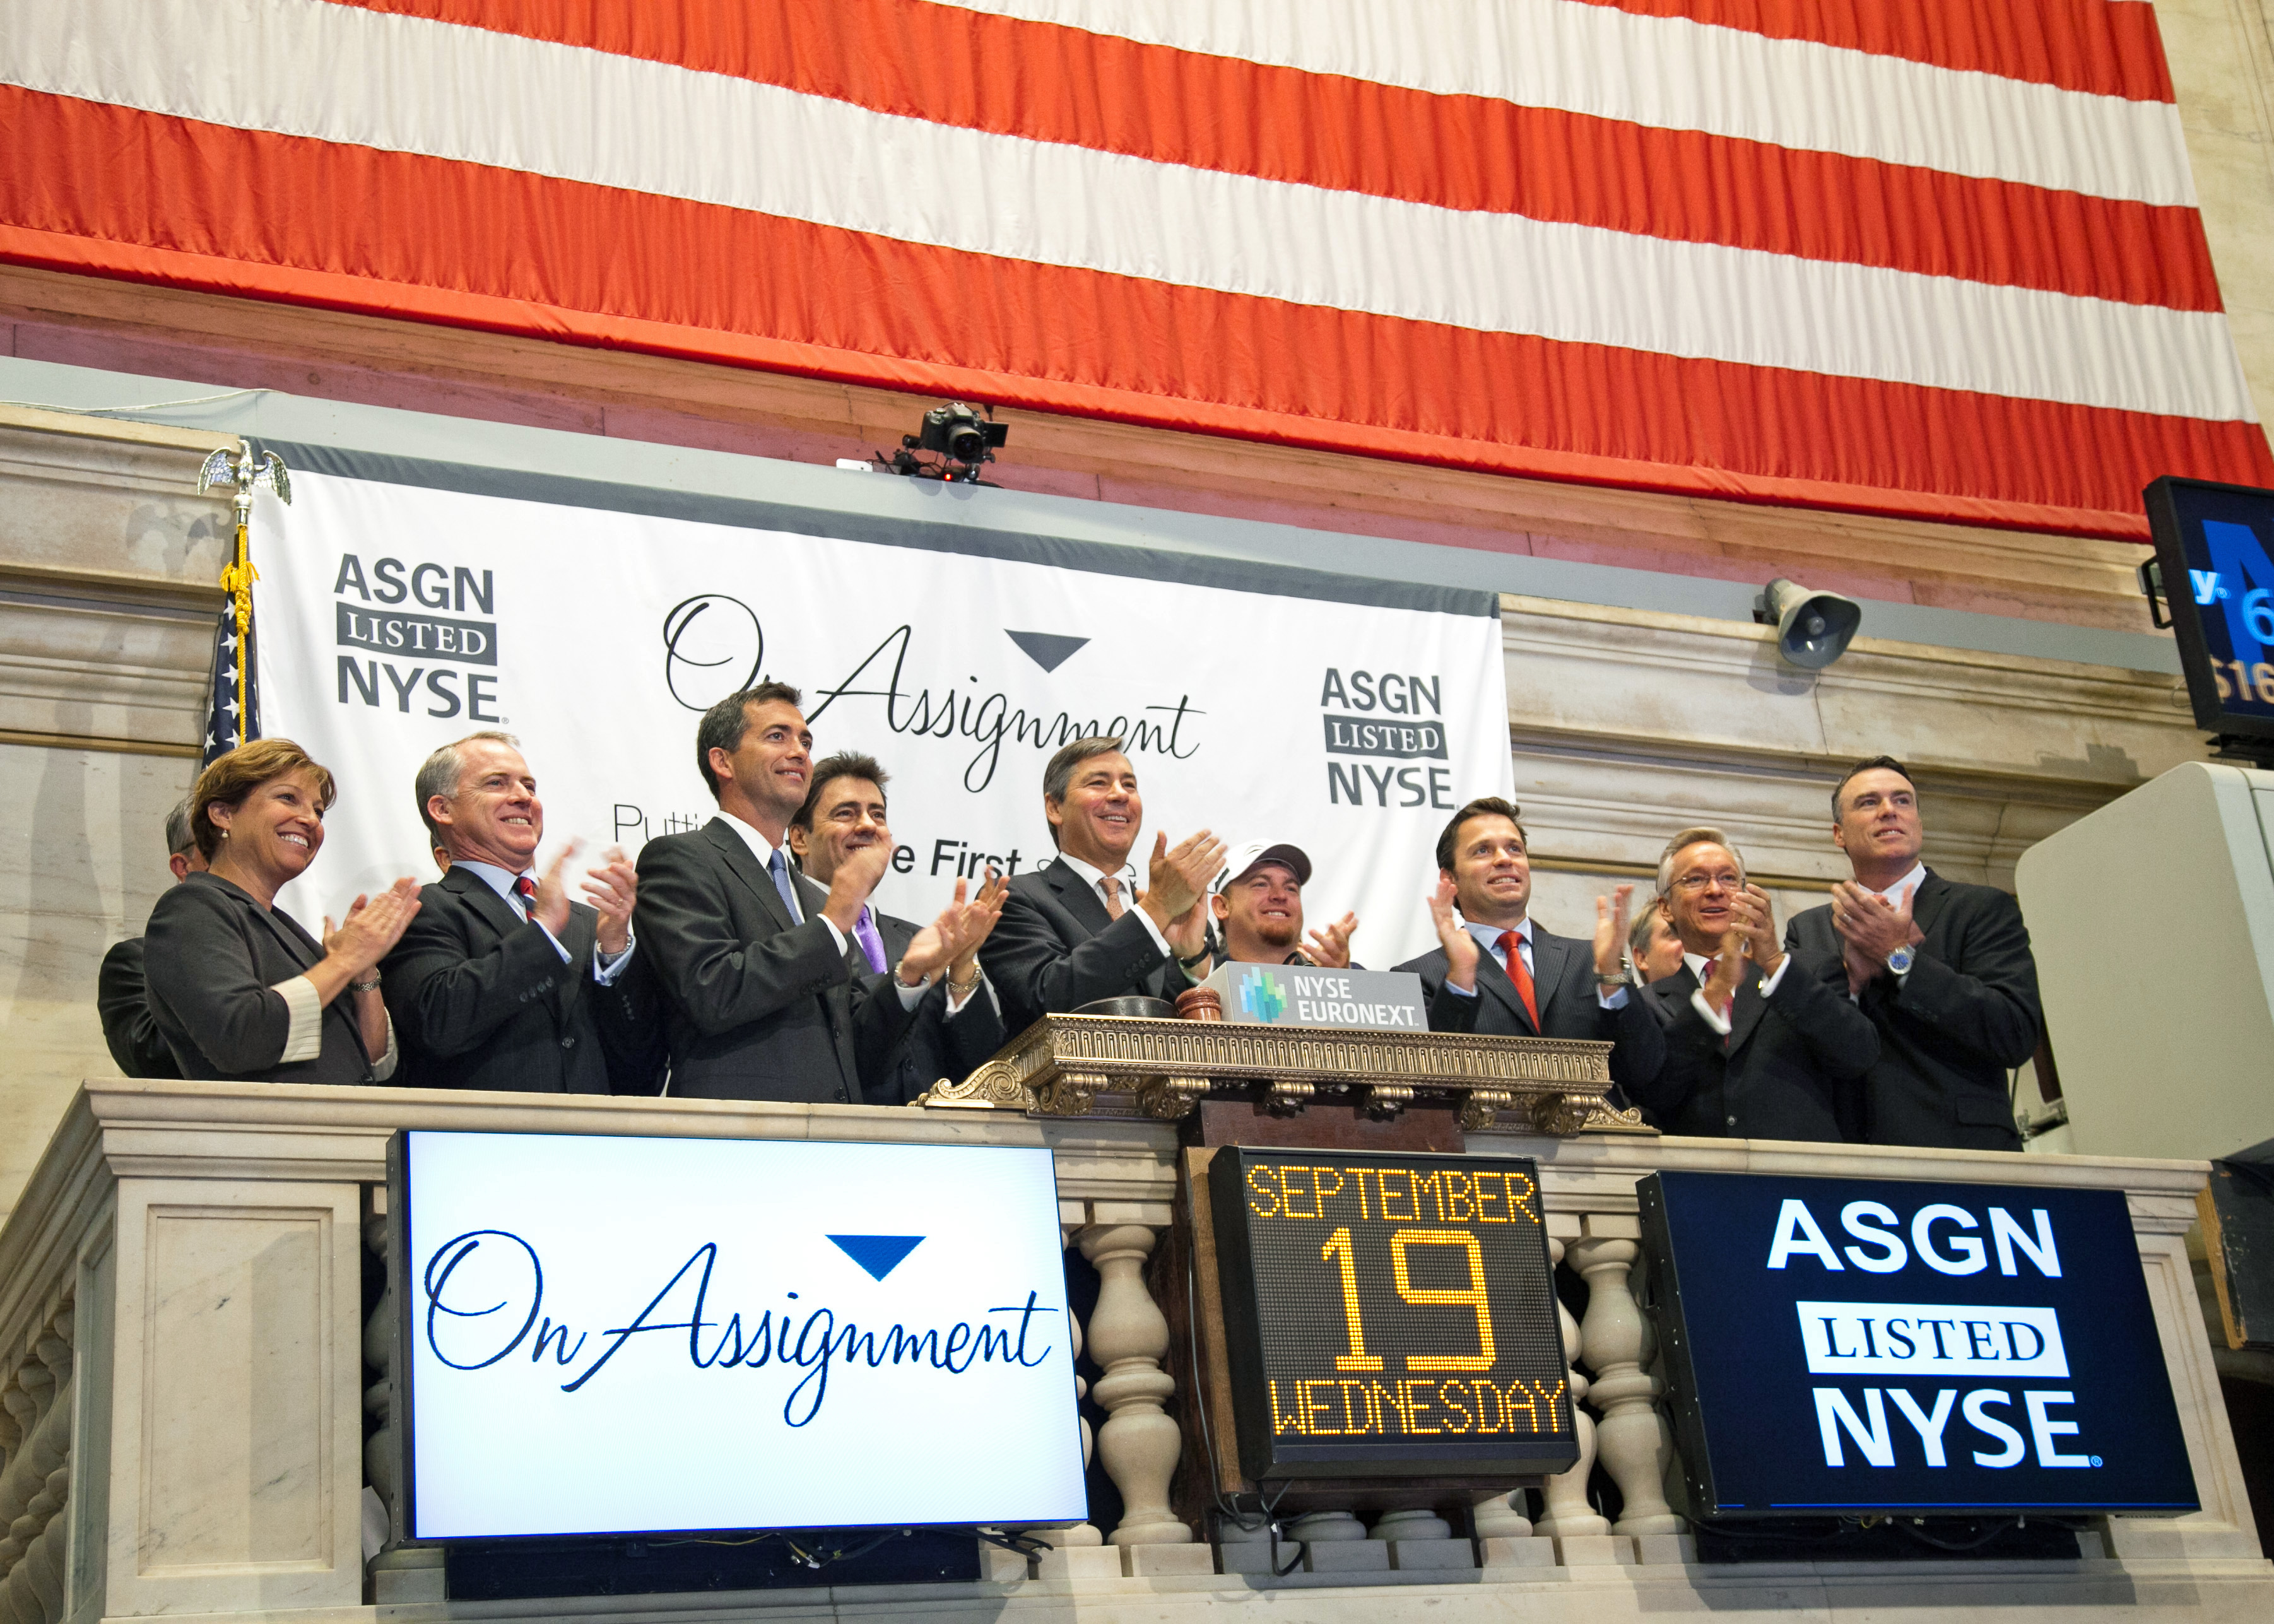 Jeff Veatch and others celebrate after ringing the opening bell at the New York Stock Exchange.